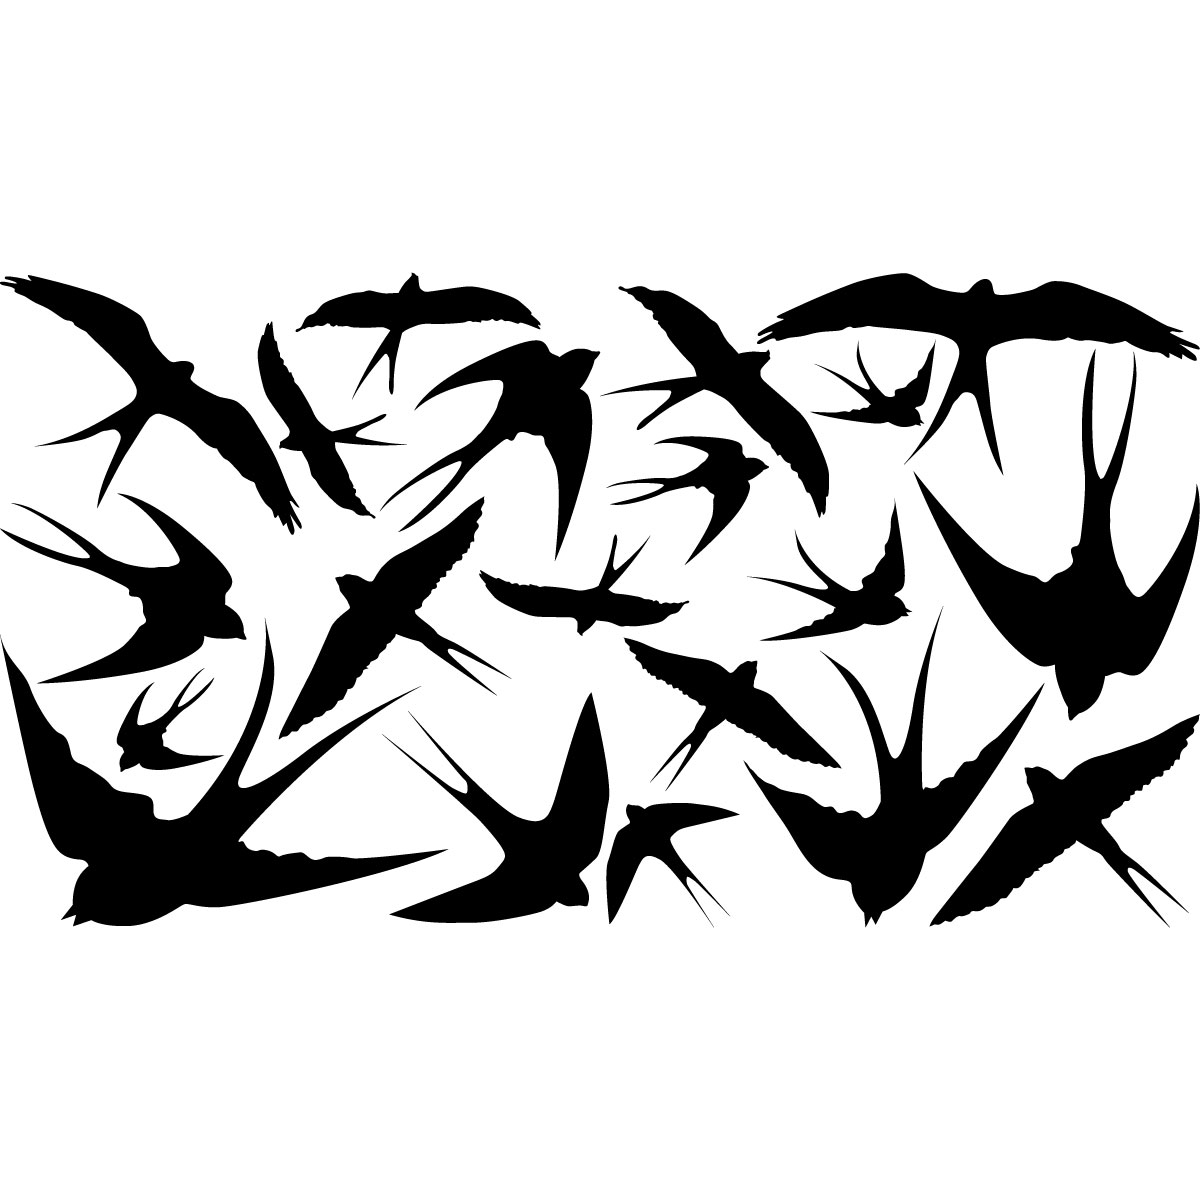 Wall decal 20 swallows